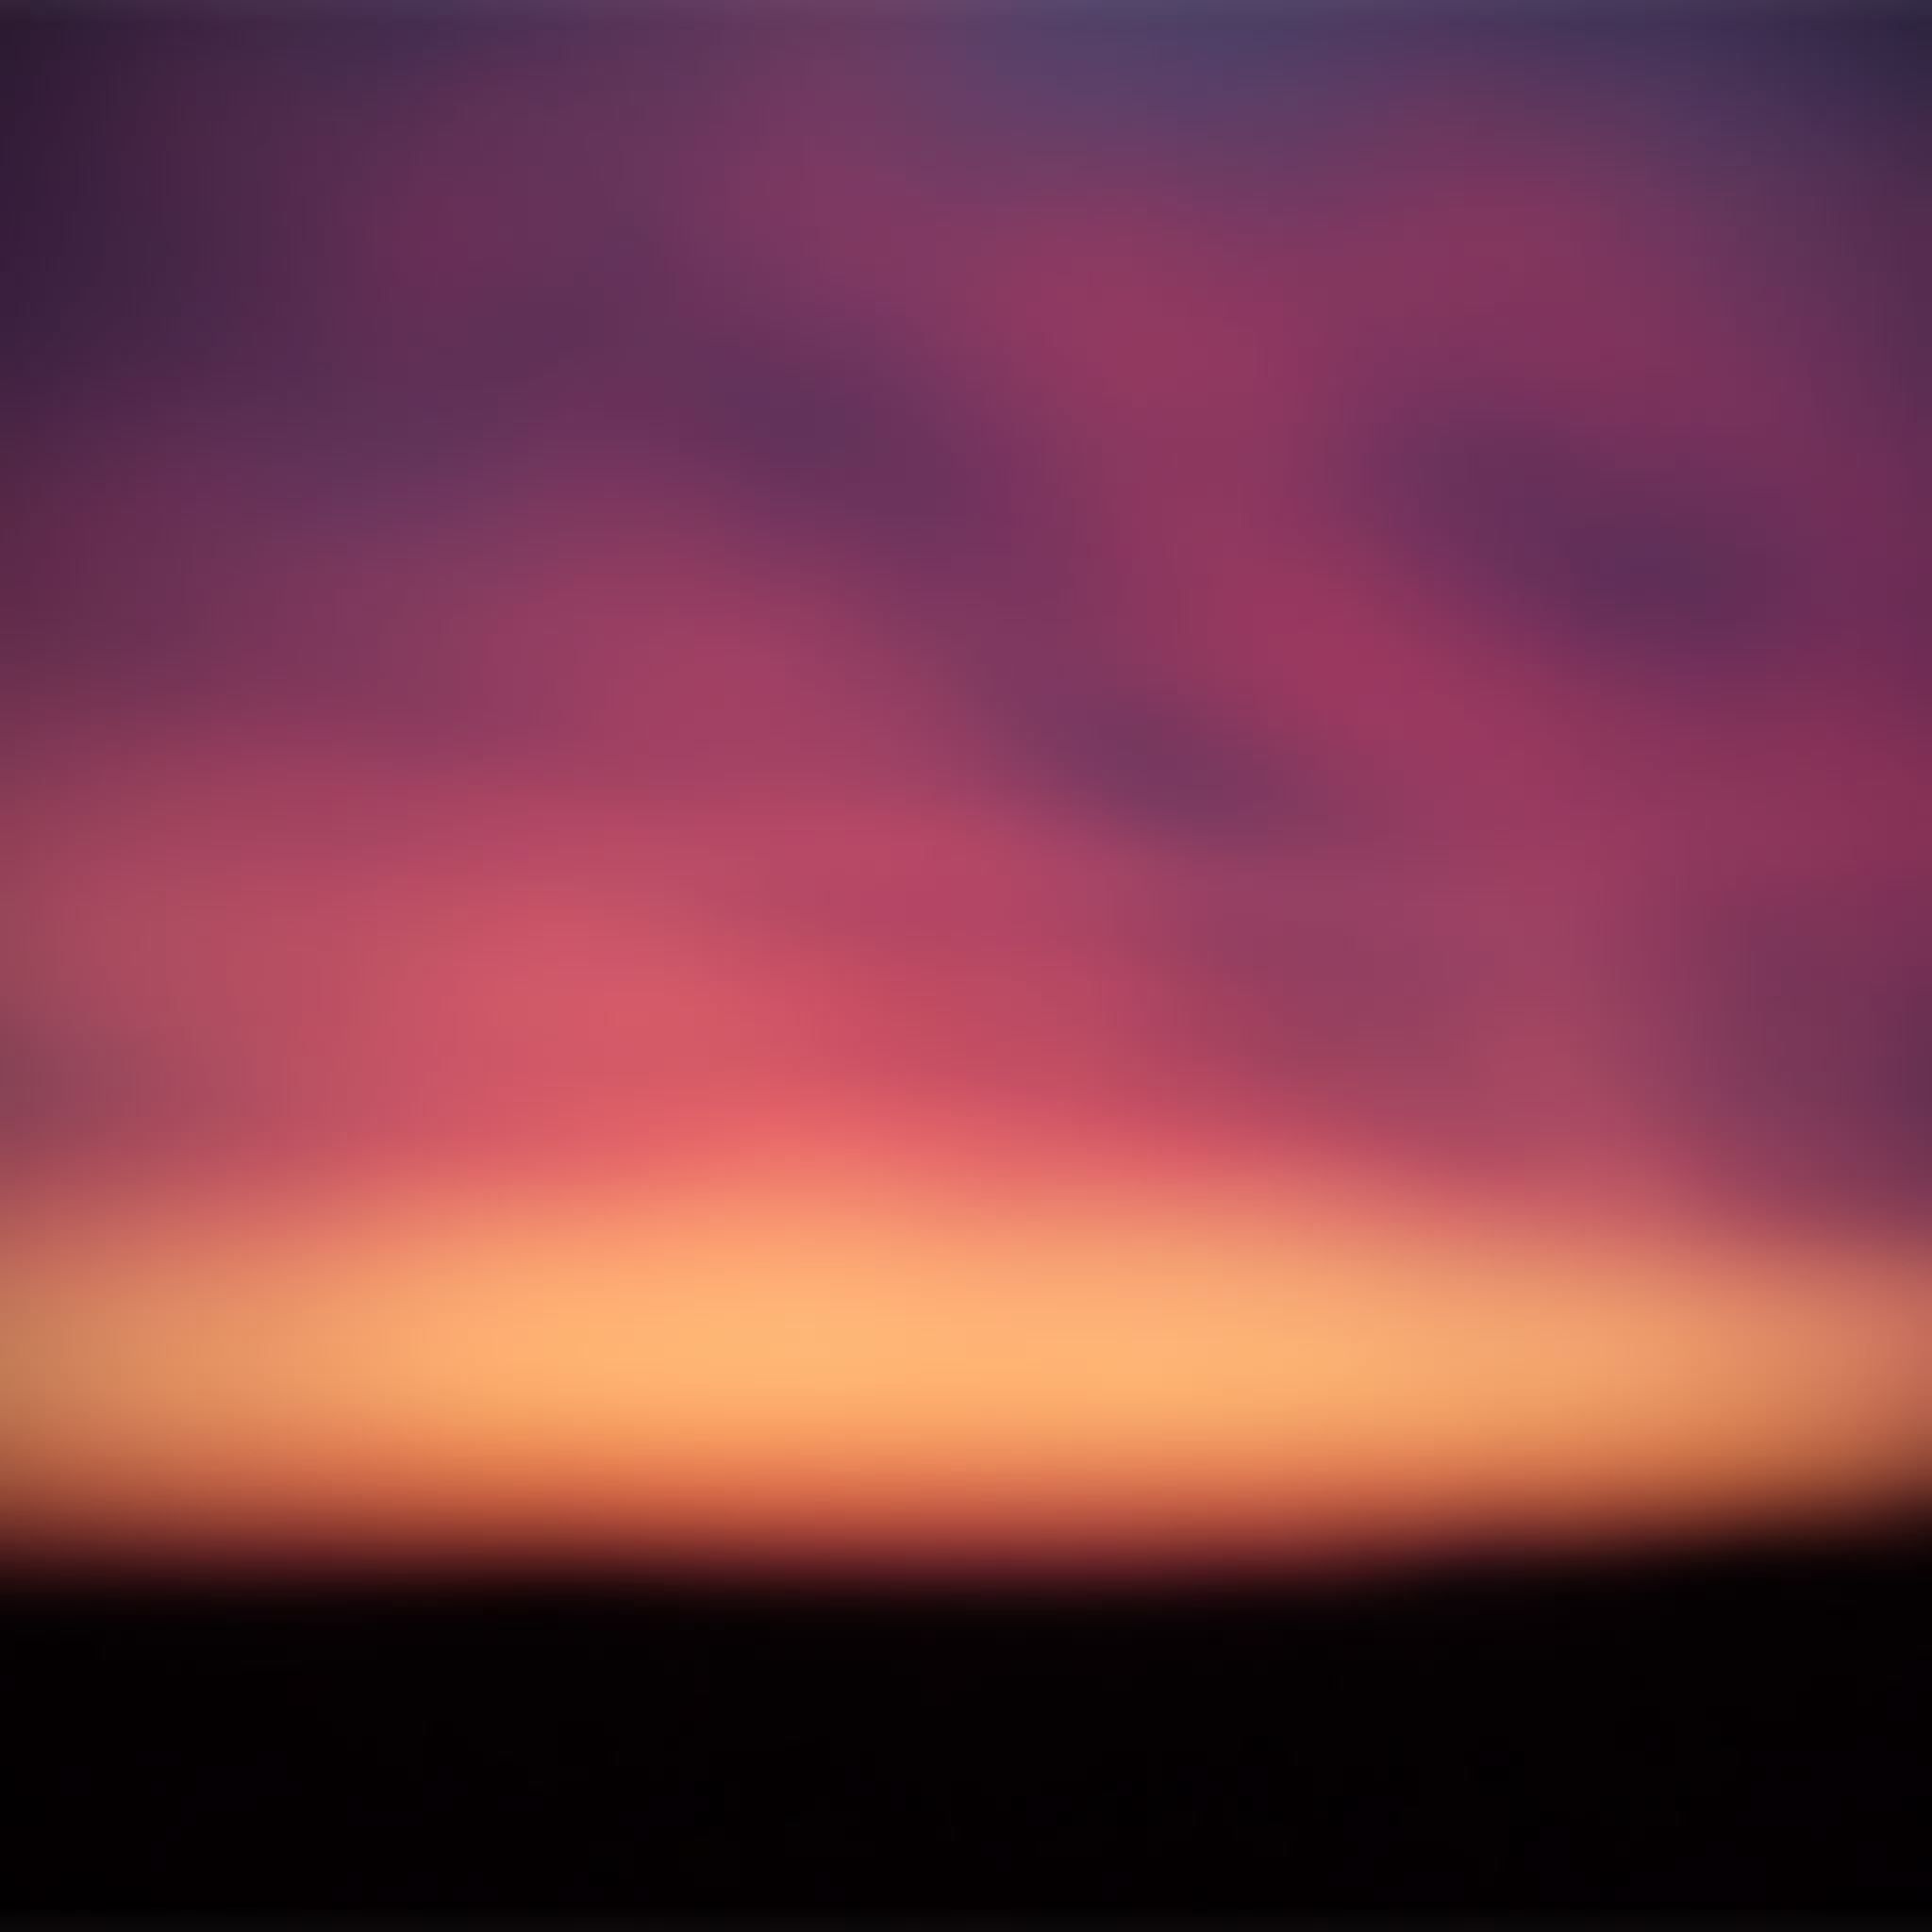 Blurry Sky Background iPad Air Wallpaper Free Download